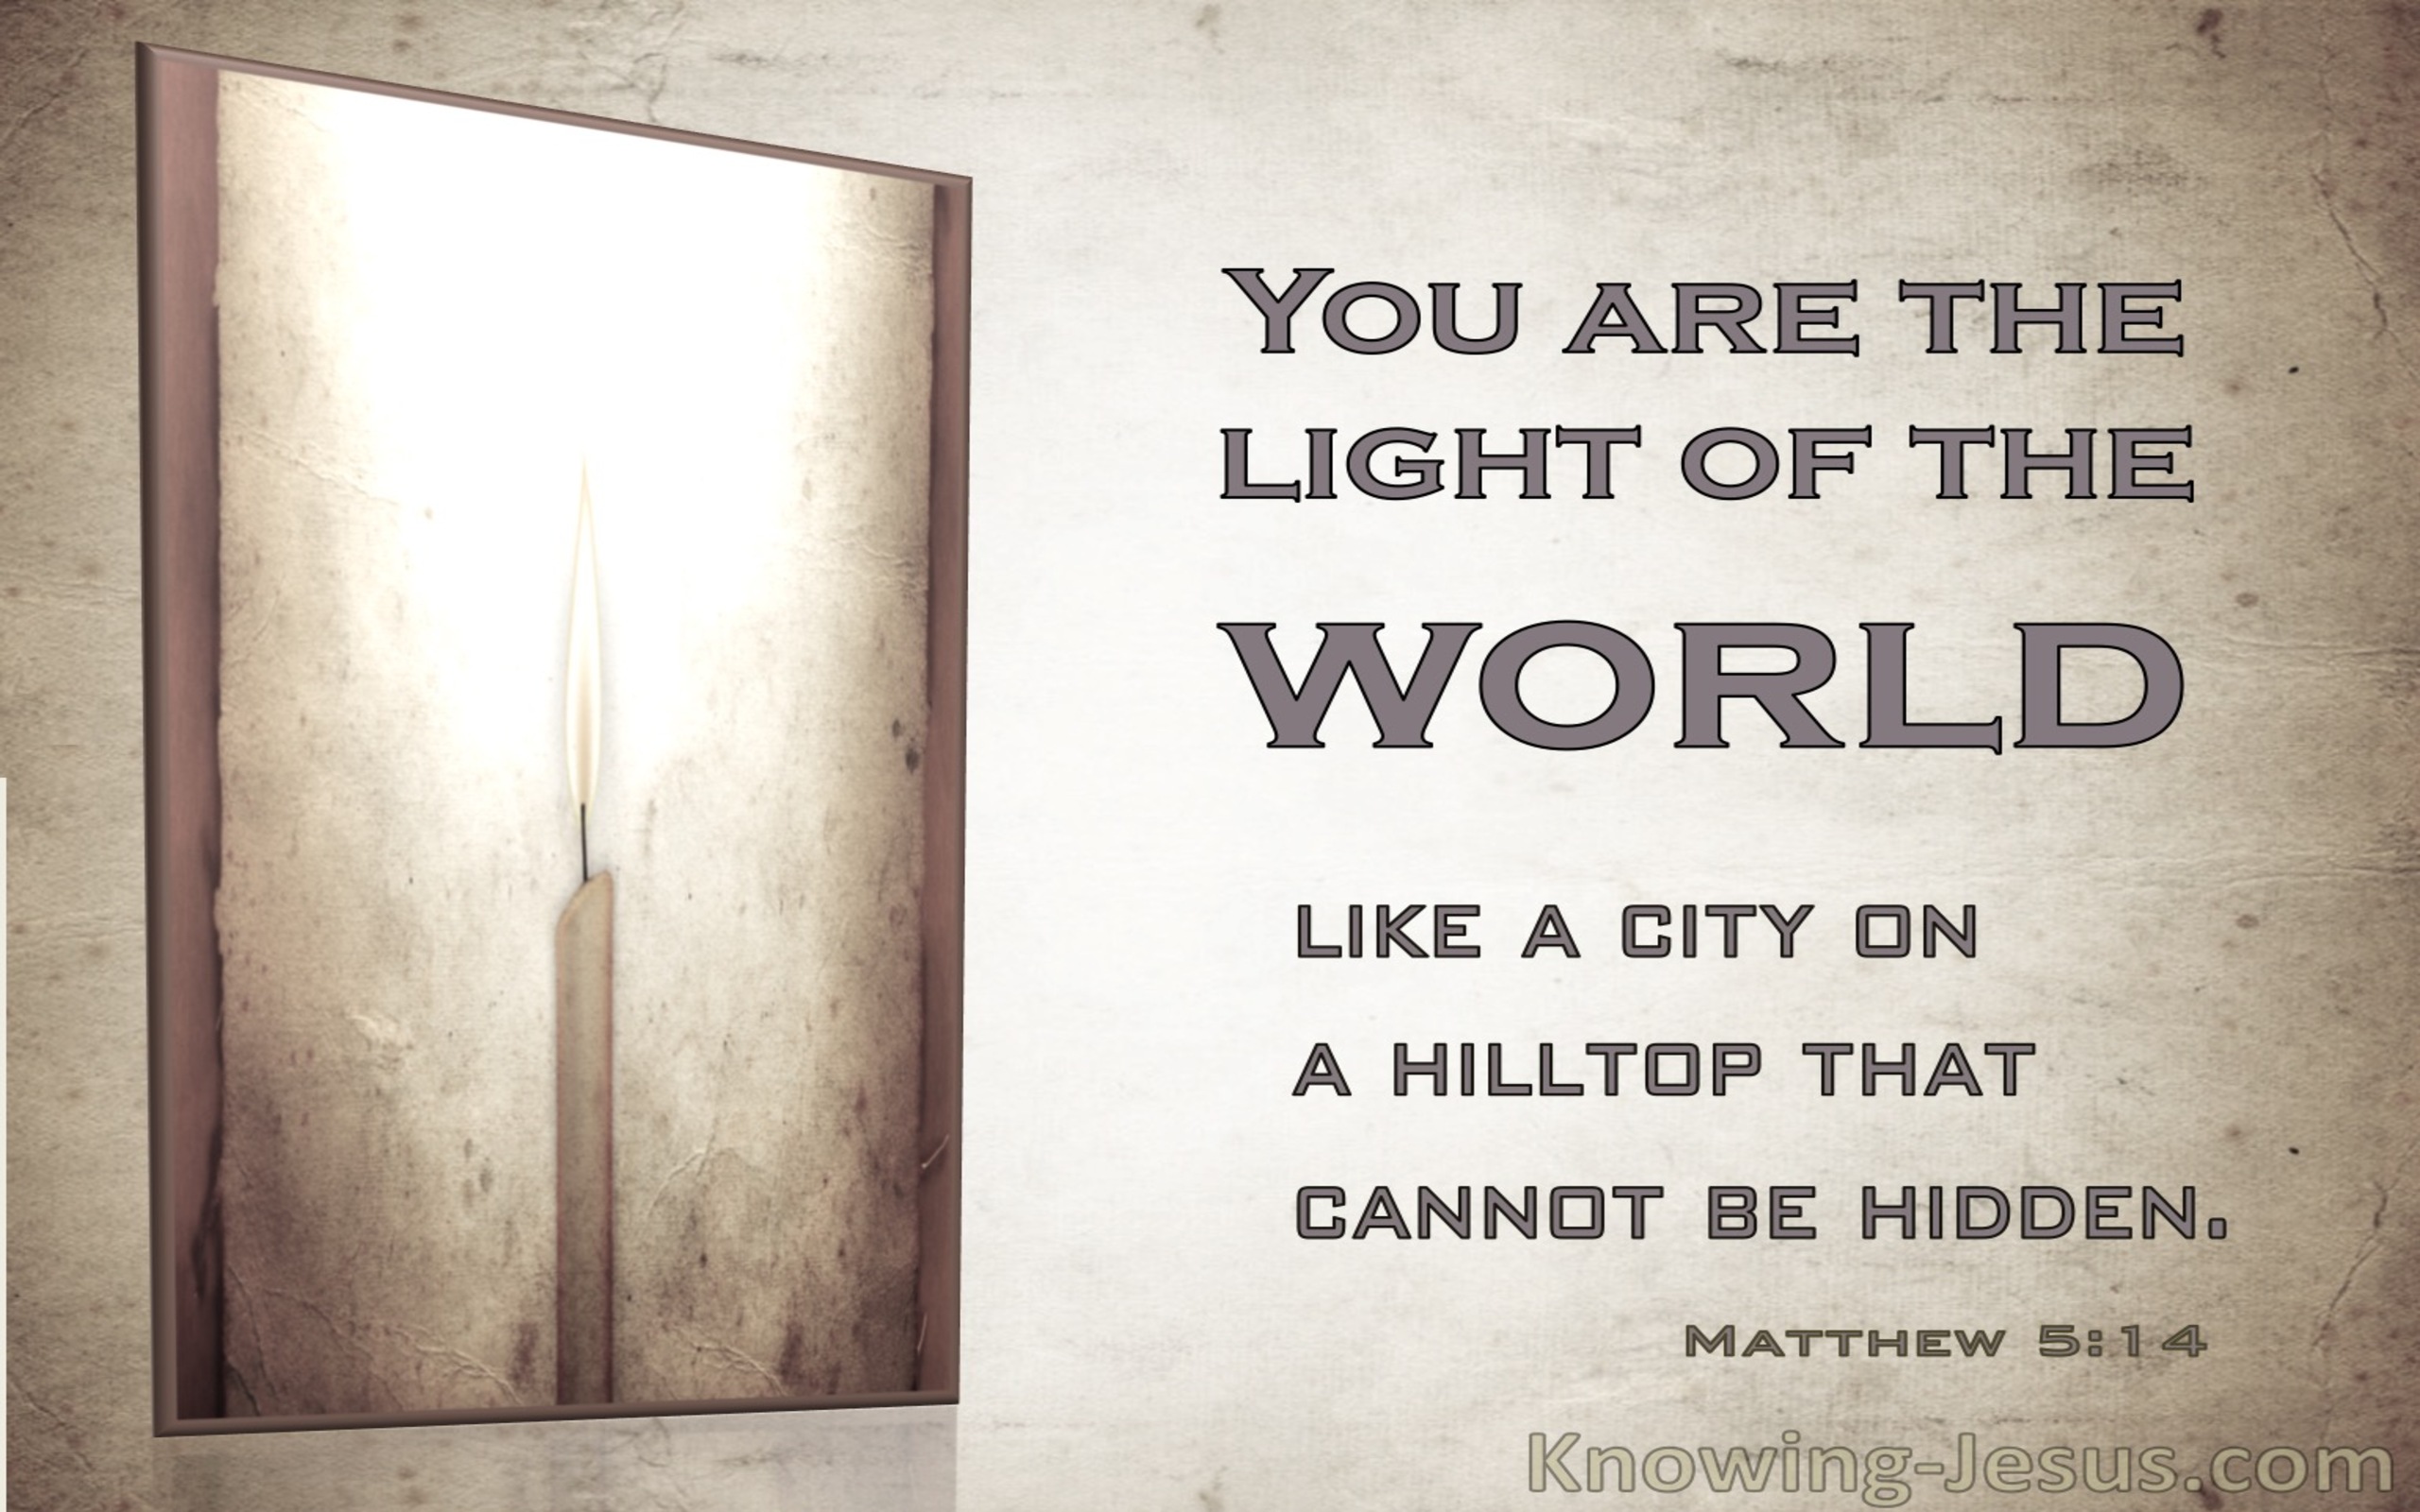 Matthew 5:14 You Are The Light Of The World (windows)12:04